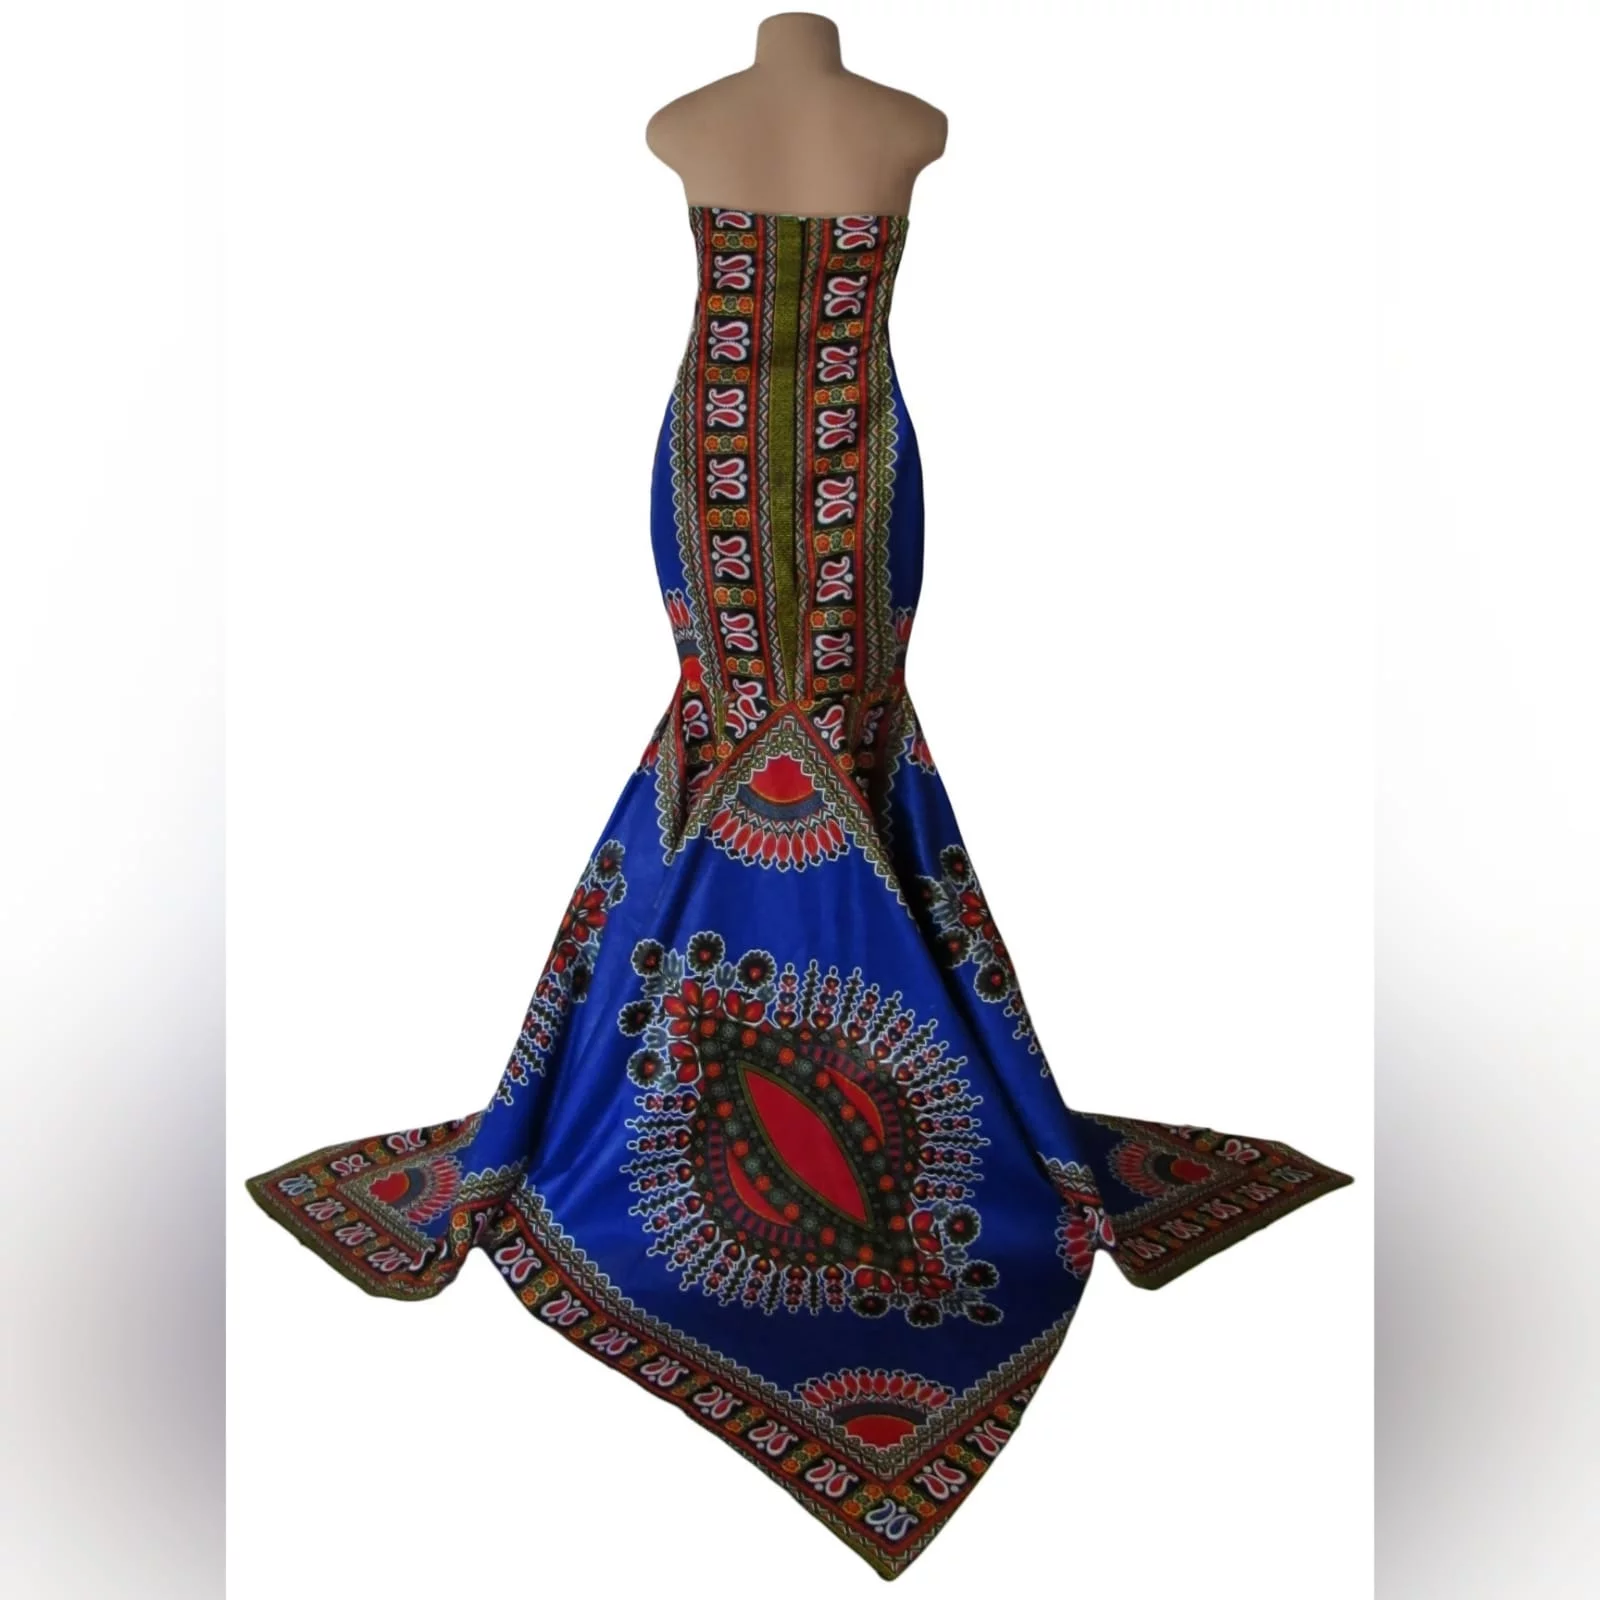 Soft mermaid formal printed dress 7 soft mermaid formal printed dress was worn for a special occasion. This mermaid dress is made with a traditional dashiki print, with a 3 point train.